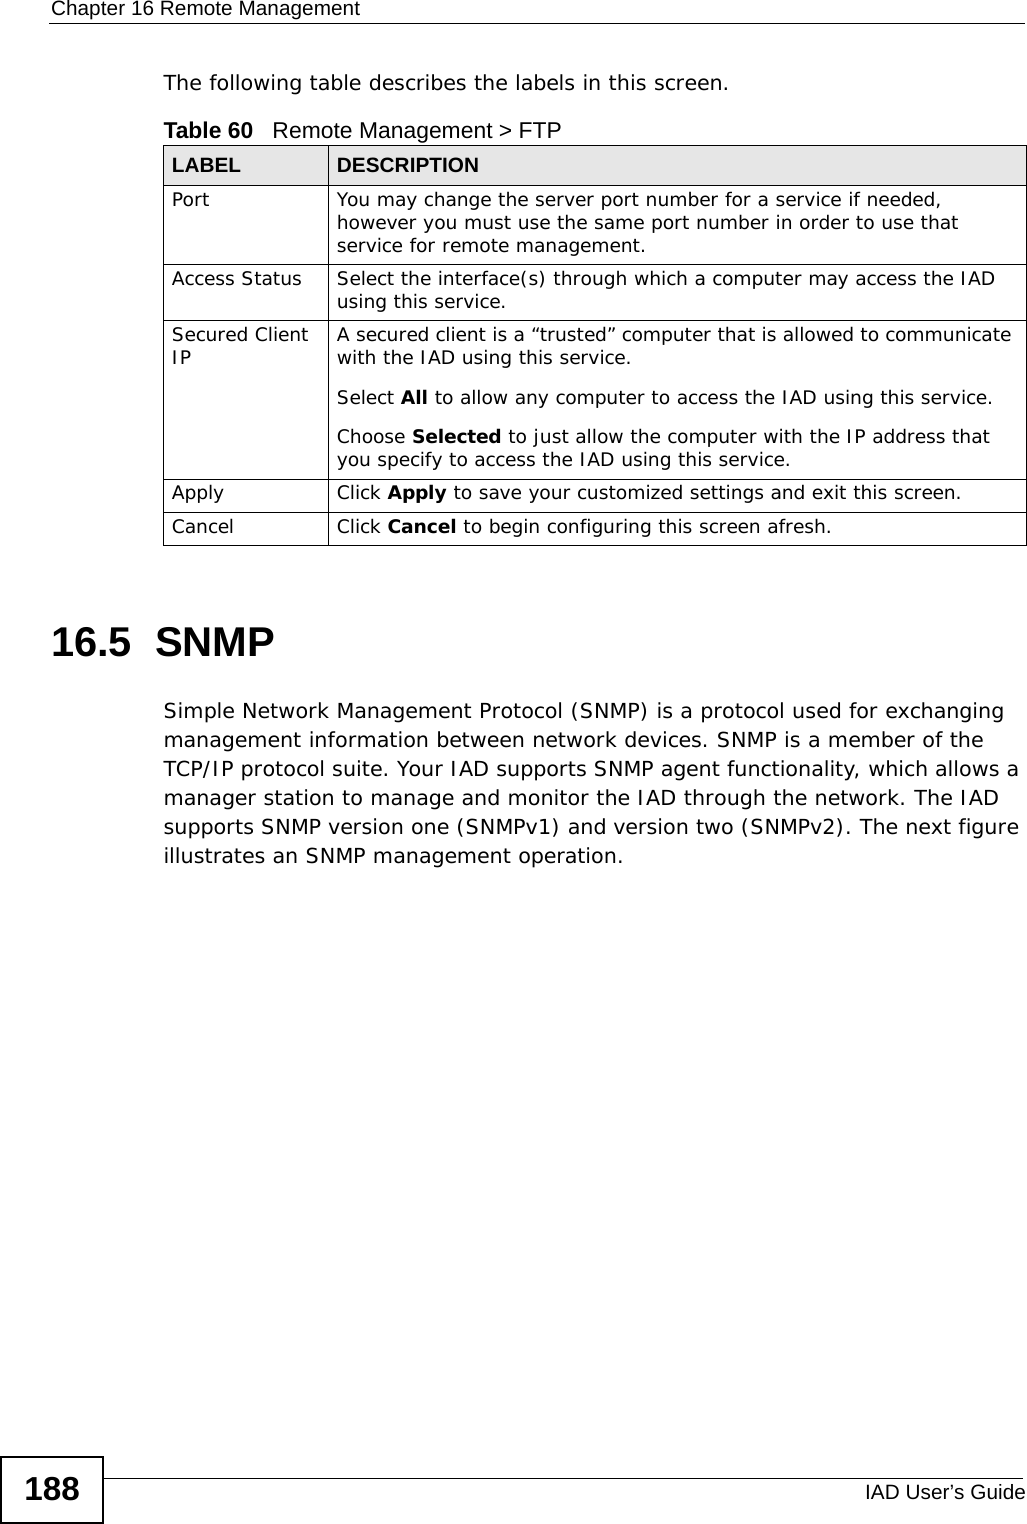 Chapter 16 Remote ManagementIAD User’s Guide188The following table describes the labels in this screen. 16.5  SNMP Simple Network Management Protocol (SNMP) is a protocol used for exchanging management information between network devices. SNMP is a member of the TCP/IP protocol suite. Your IAD supports SNMP agent functionality, which allows a manager station to manage and monitor the IAD through the network. The IAD supports SNMP version one (SNMPv1) and version two (SNMPv2). The next figure illustrates an SNMP management operation.Table 60   Remote Management &gt; FTPLABEL DESCRIPTIONPort You may change the server port number for a service if needed, however you must use the same port number in order to use that service for remote management.Access Status Select the interface(s) through which a computer may access the IAD using this service.Secured Client IP A secured client is a “trusted” computer that is allowed to communicate with the IAD using this service. Select All to allow any computer to access the IAD using this service.Choose Selected to just allow the computer with the IP address that you specify to access the IAD using this service.Apply Click Apply to save your customized settings and exit this screen. Cancel Click Cancel to begin configuring this screen afresh.